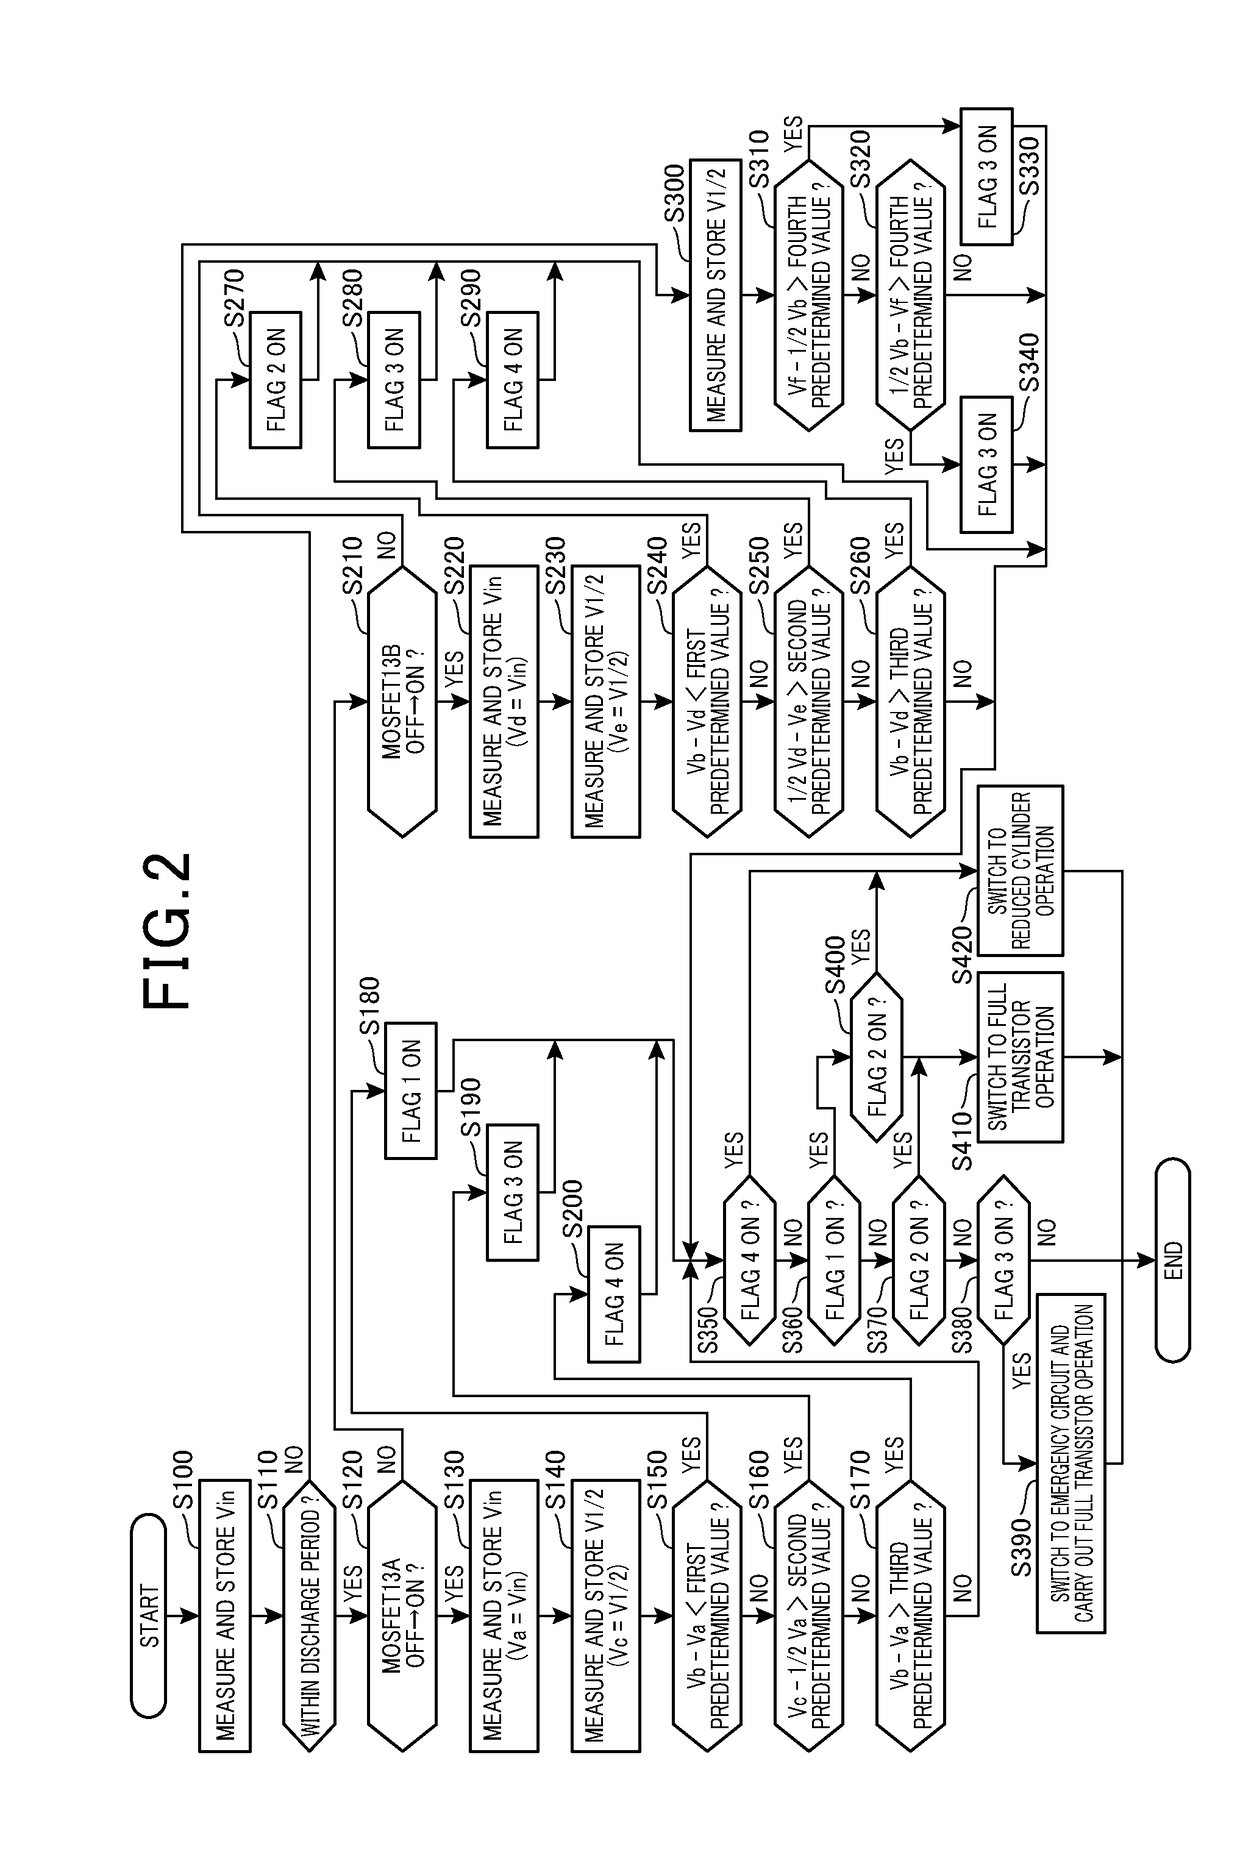 Failure diagnosis device for ignition circuit